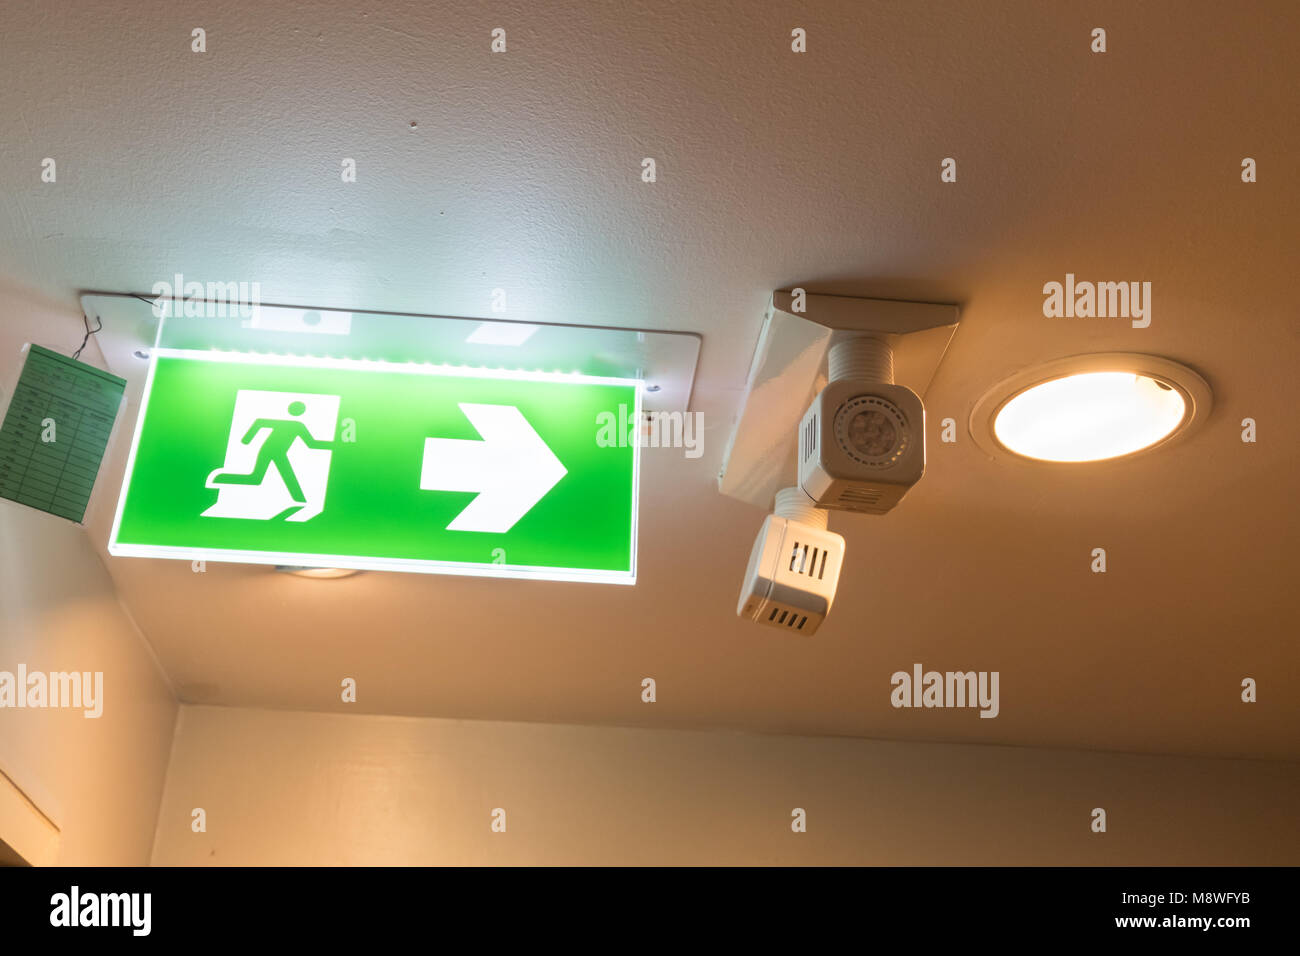 Green emergency exit sign showing the way to escape. Stock Photo